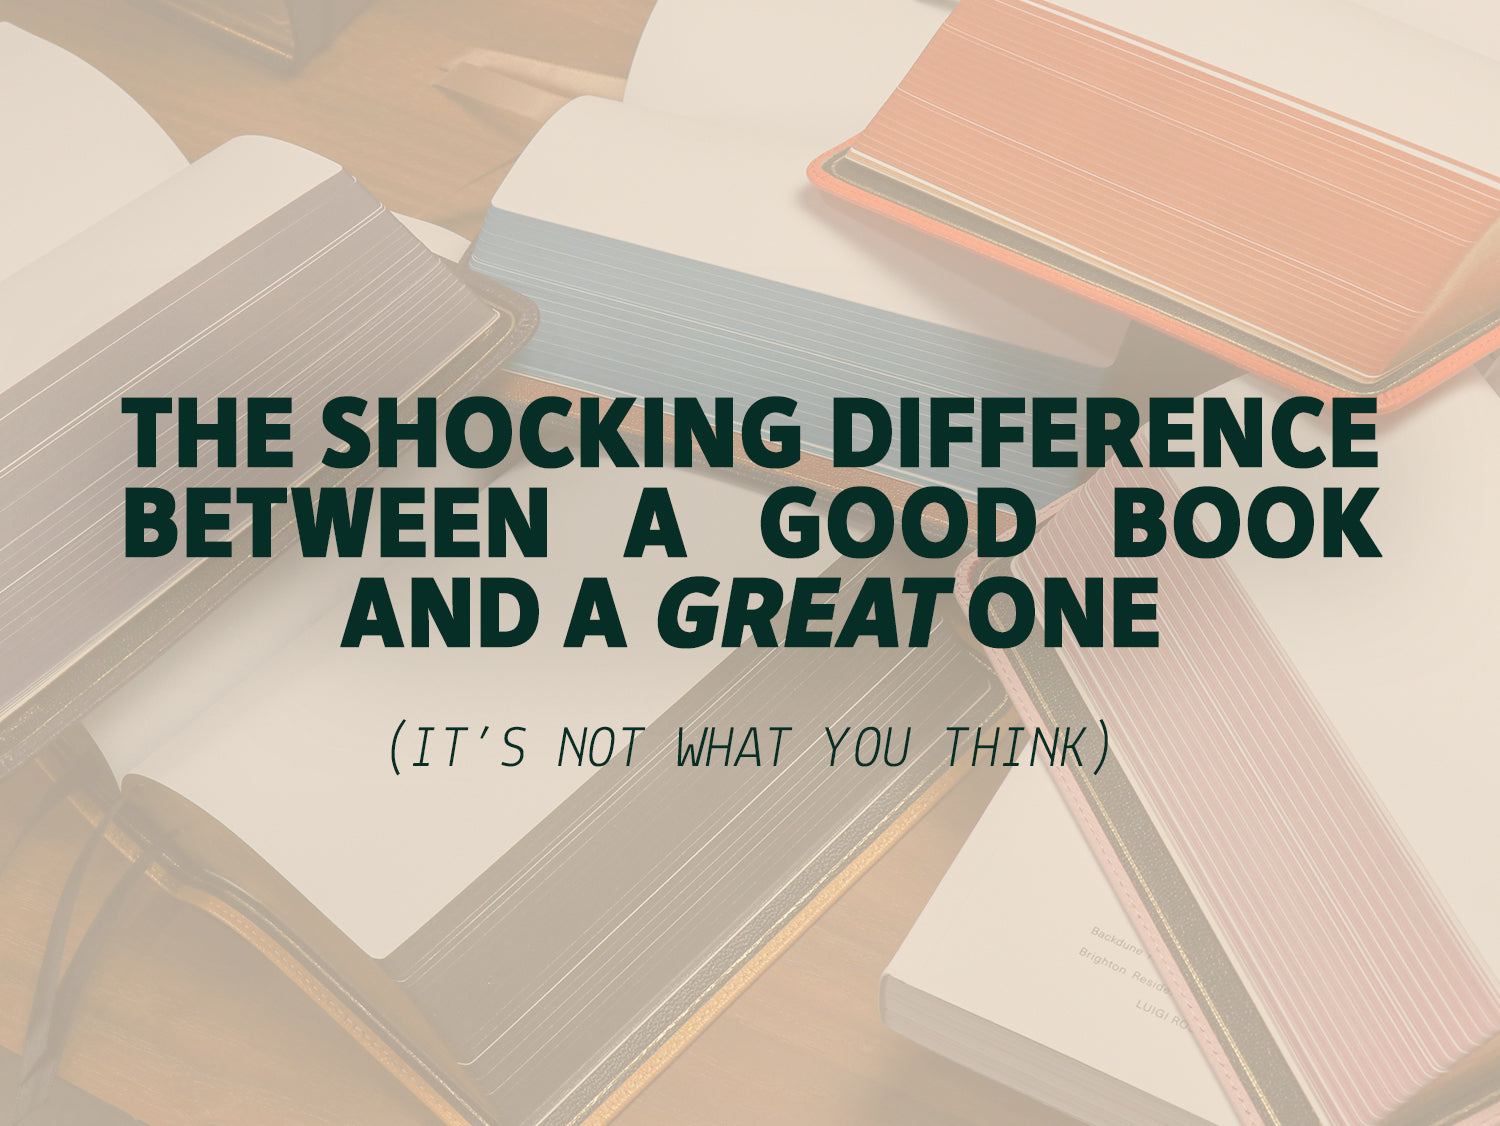 The shocking difference between a good book and a great one